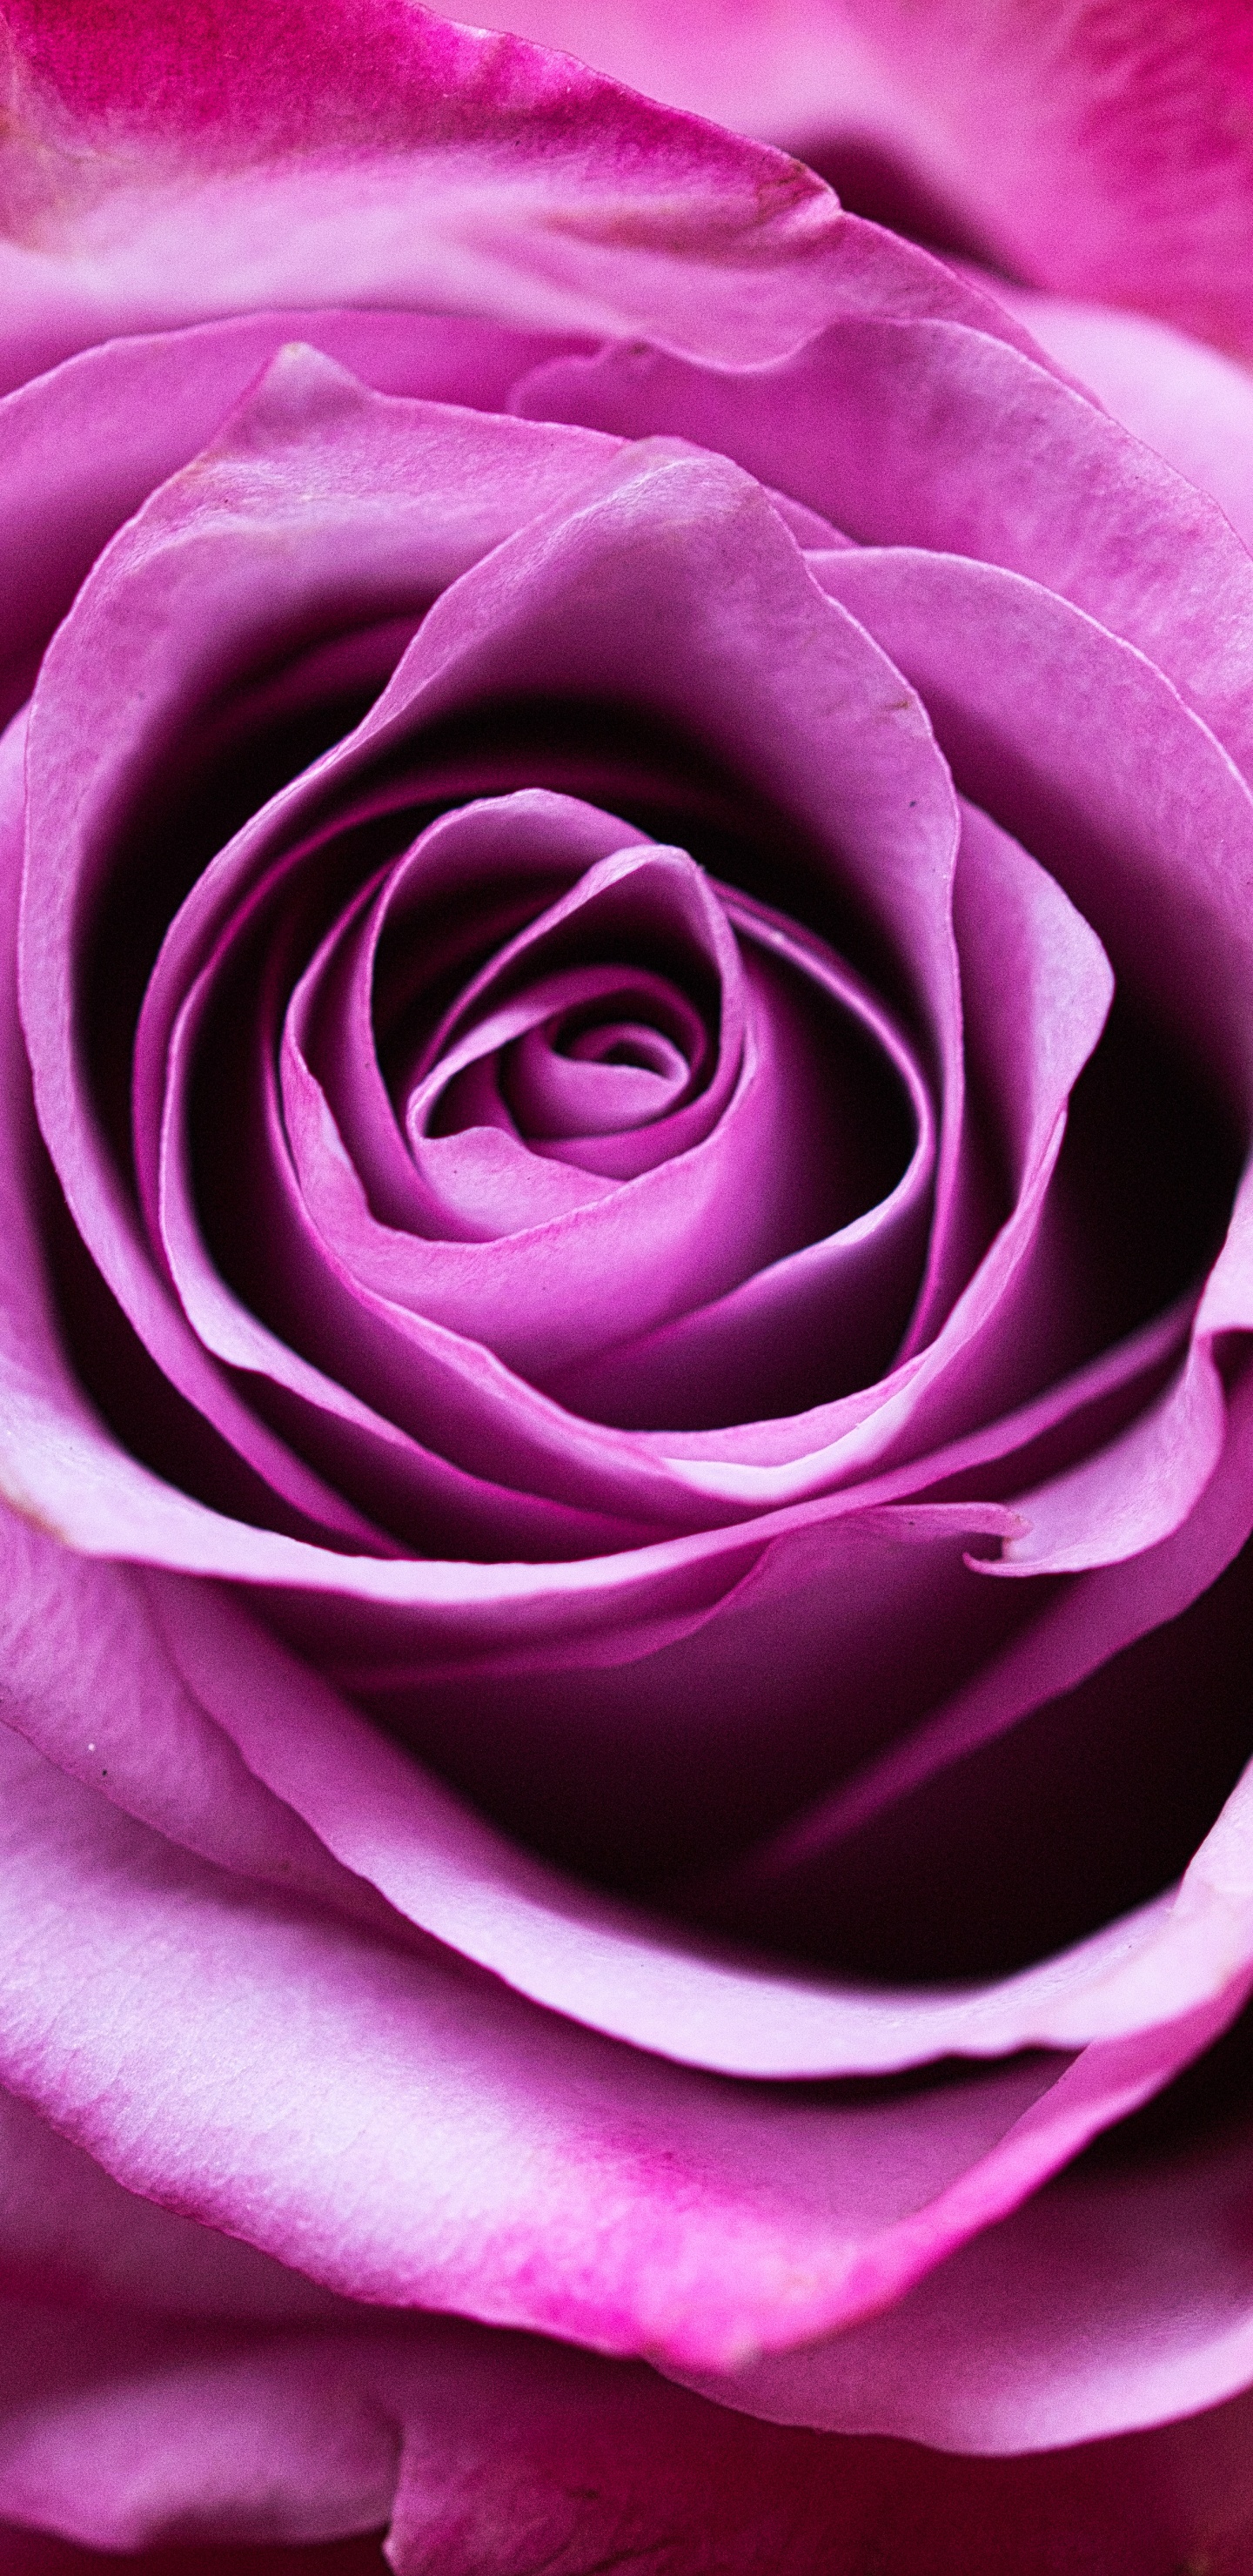 Pink Rose in Close up Photography. Wallpaper in 1440x2960 Resolution